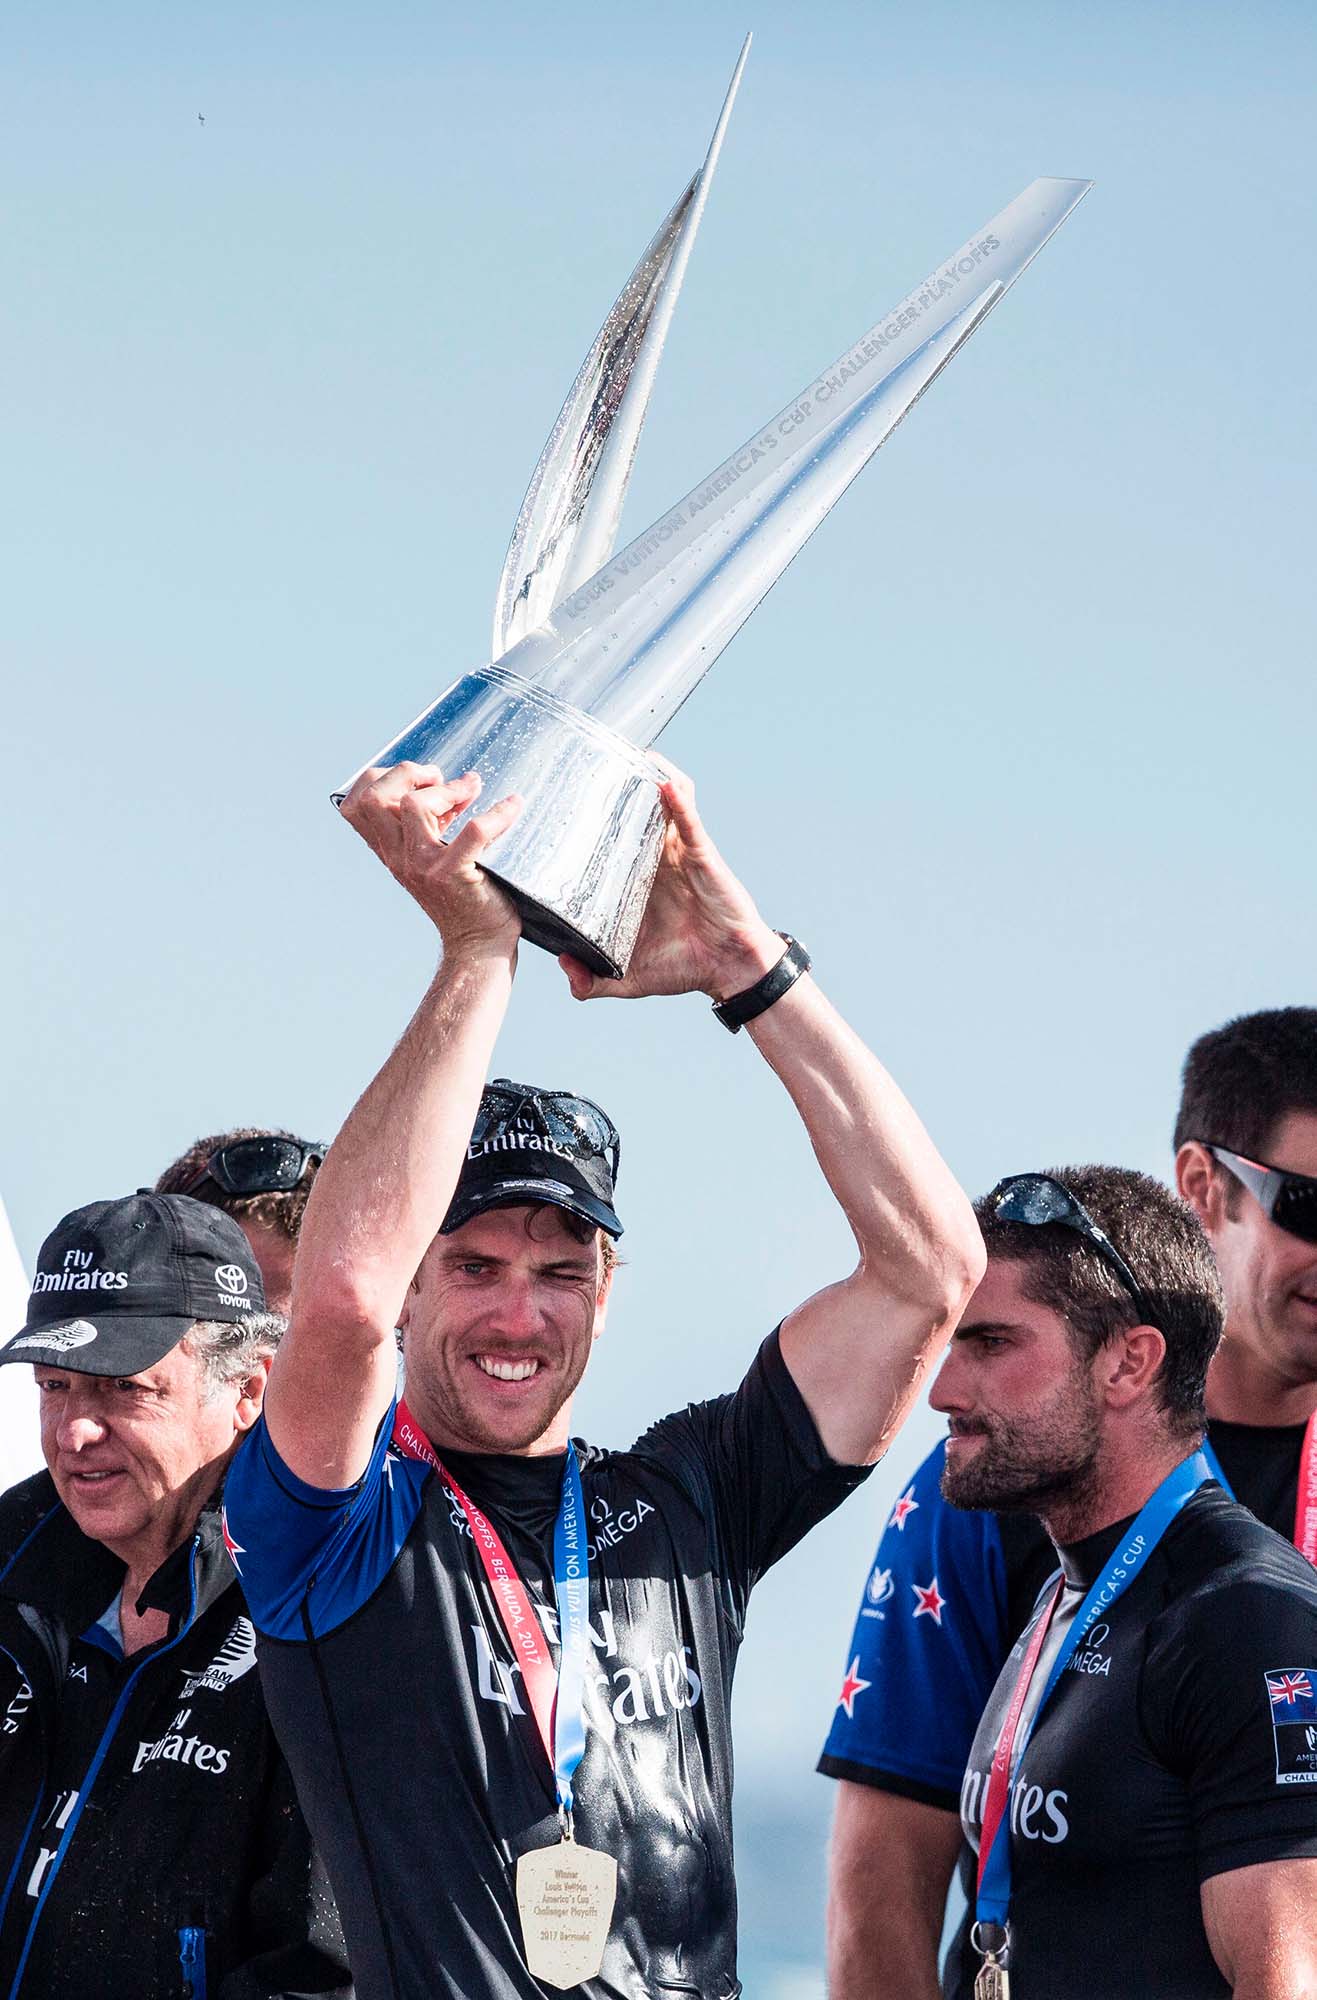 The Louis Vuitton Cup challenger series begins!